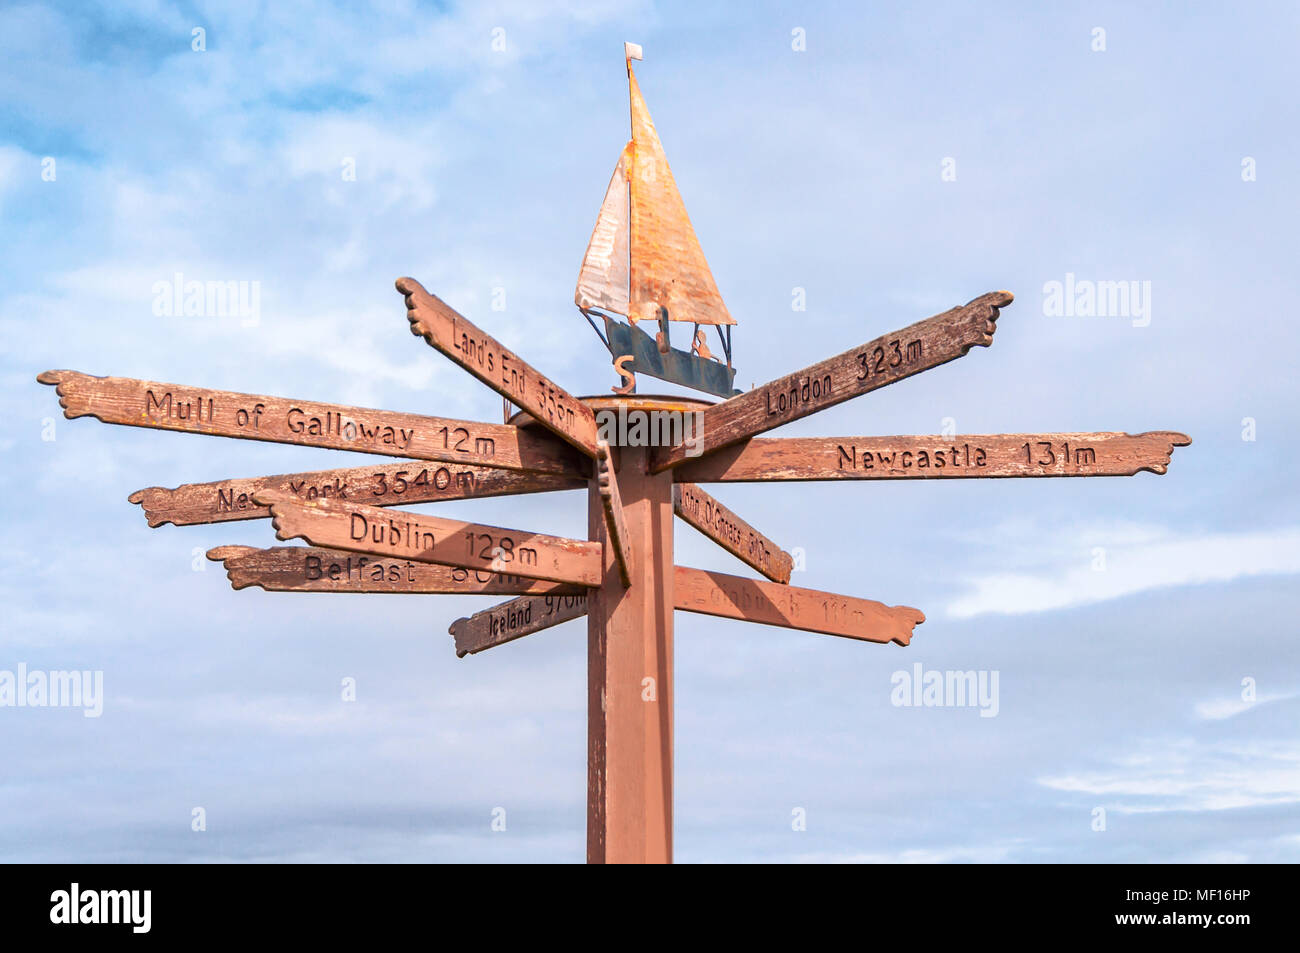 Tourist direction & distance signs mounted on post with weather vane on top, located on shorefront in Port William, Dumfries & Galloway, Scotland, UK Stock Photo